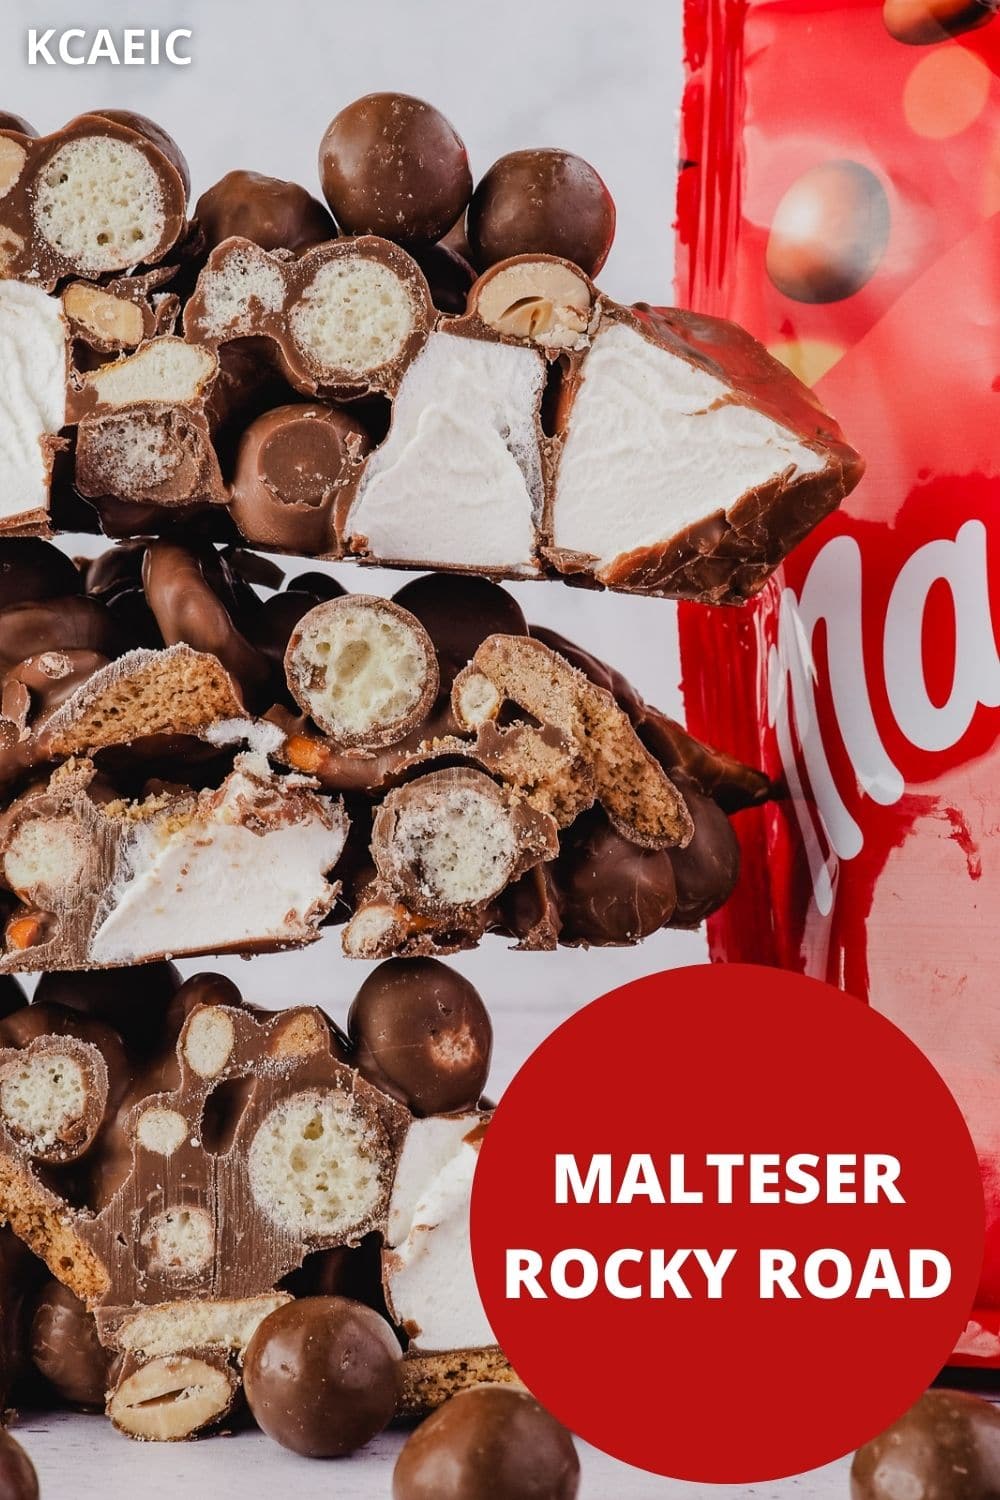 Stack of rocky road with a packet of Maltesers, with text overlay Malteser Rocky Road and KCAEIC.